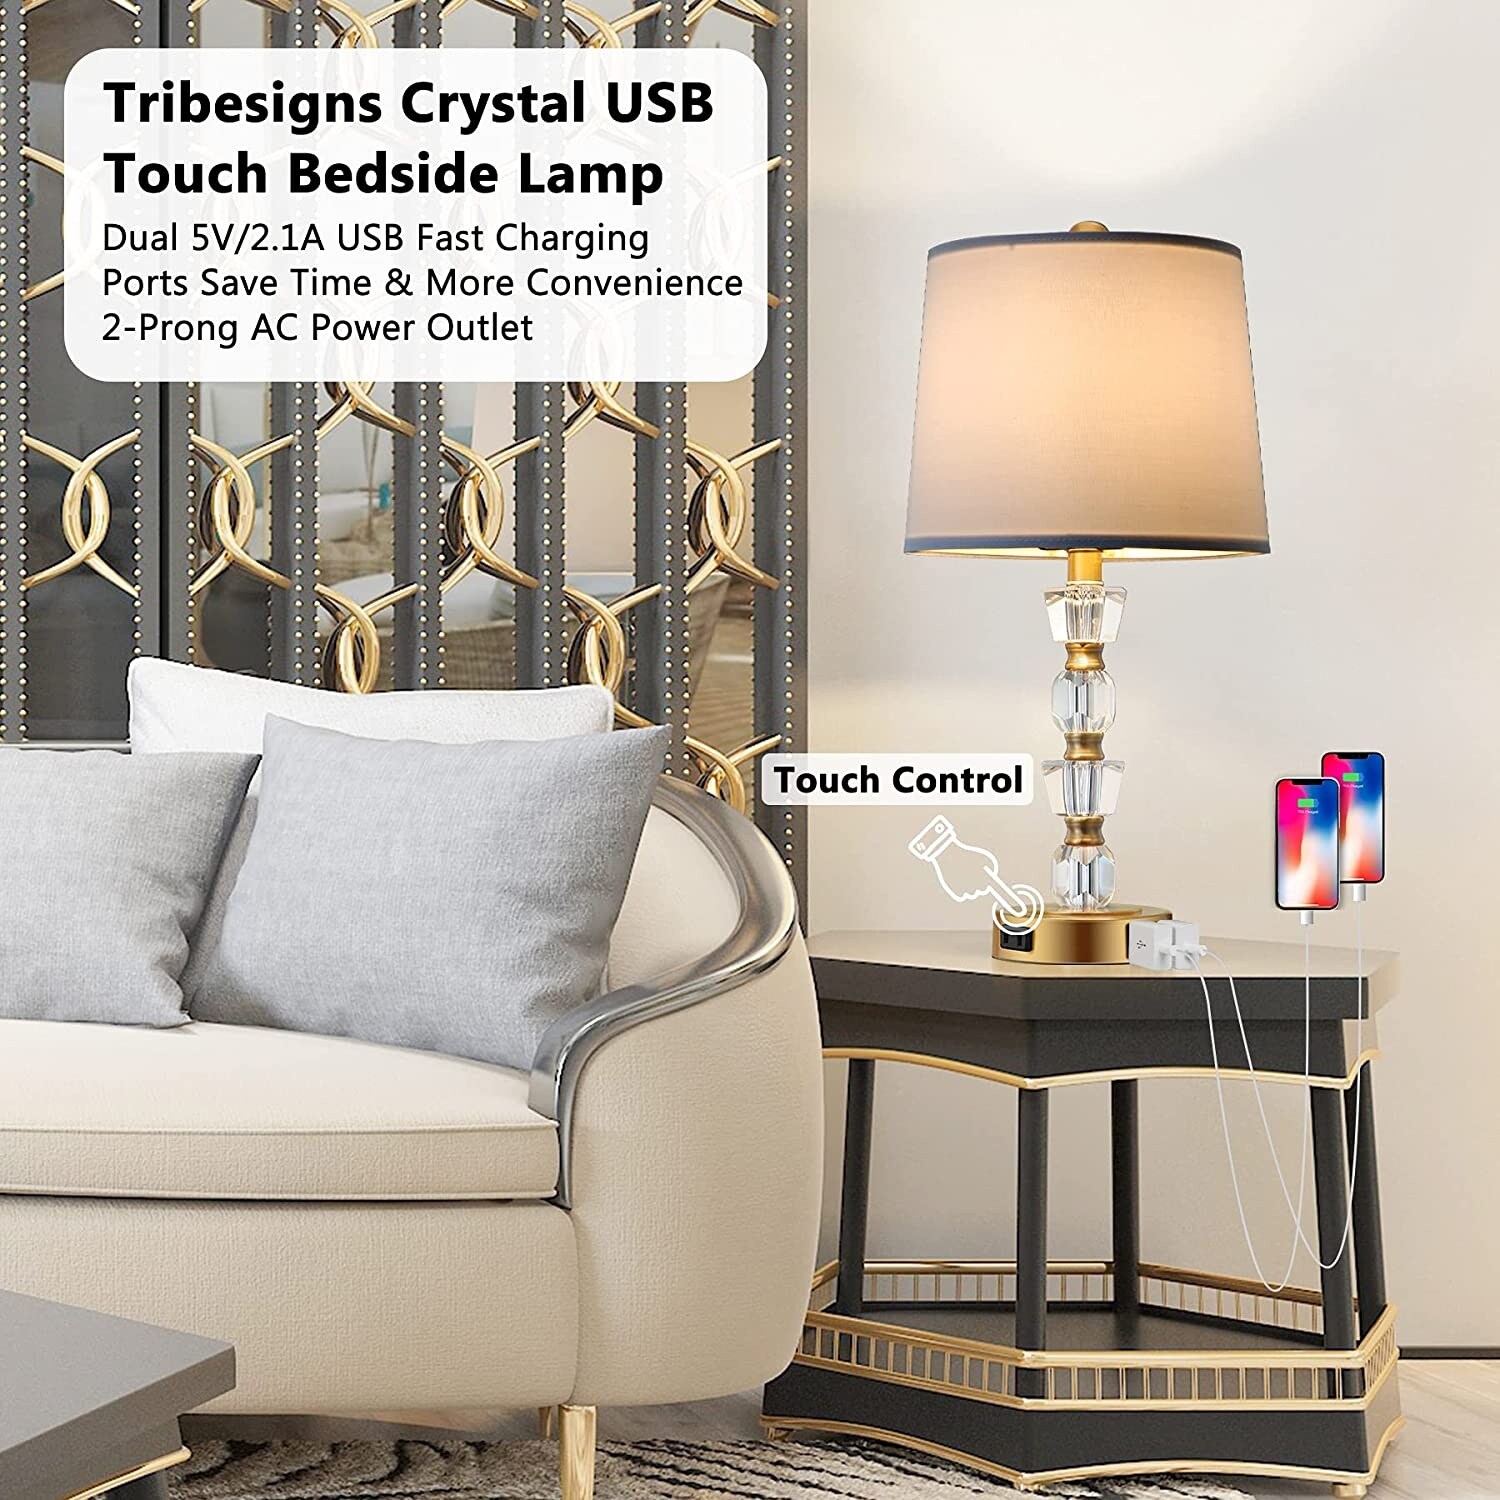 Gold Accent LED Desk Lamp with USB Charging Port and Touch-Sensitive Control Panel 